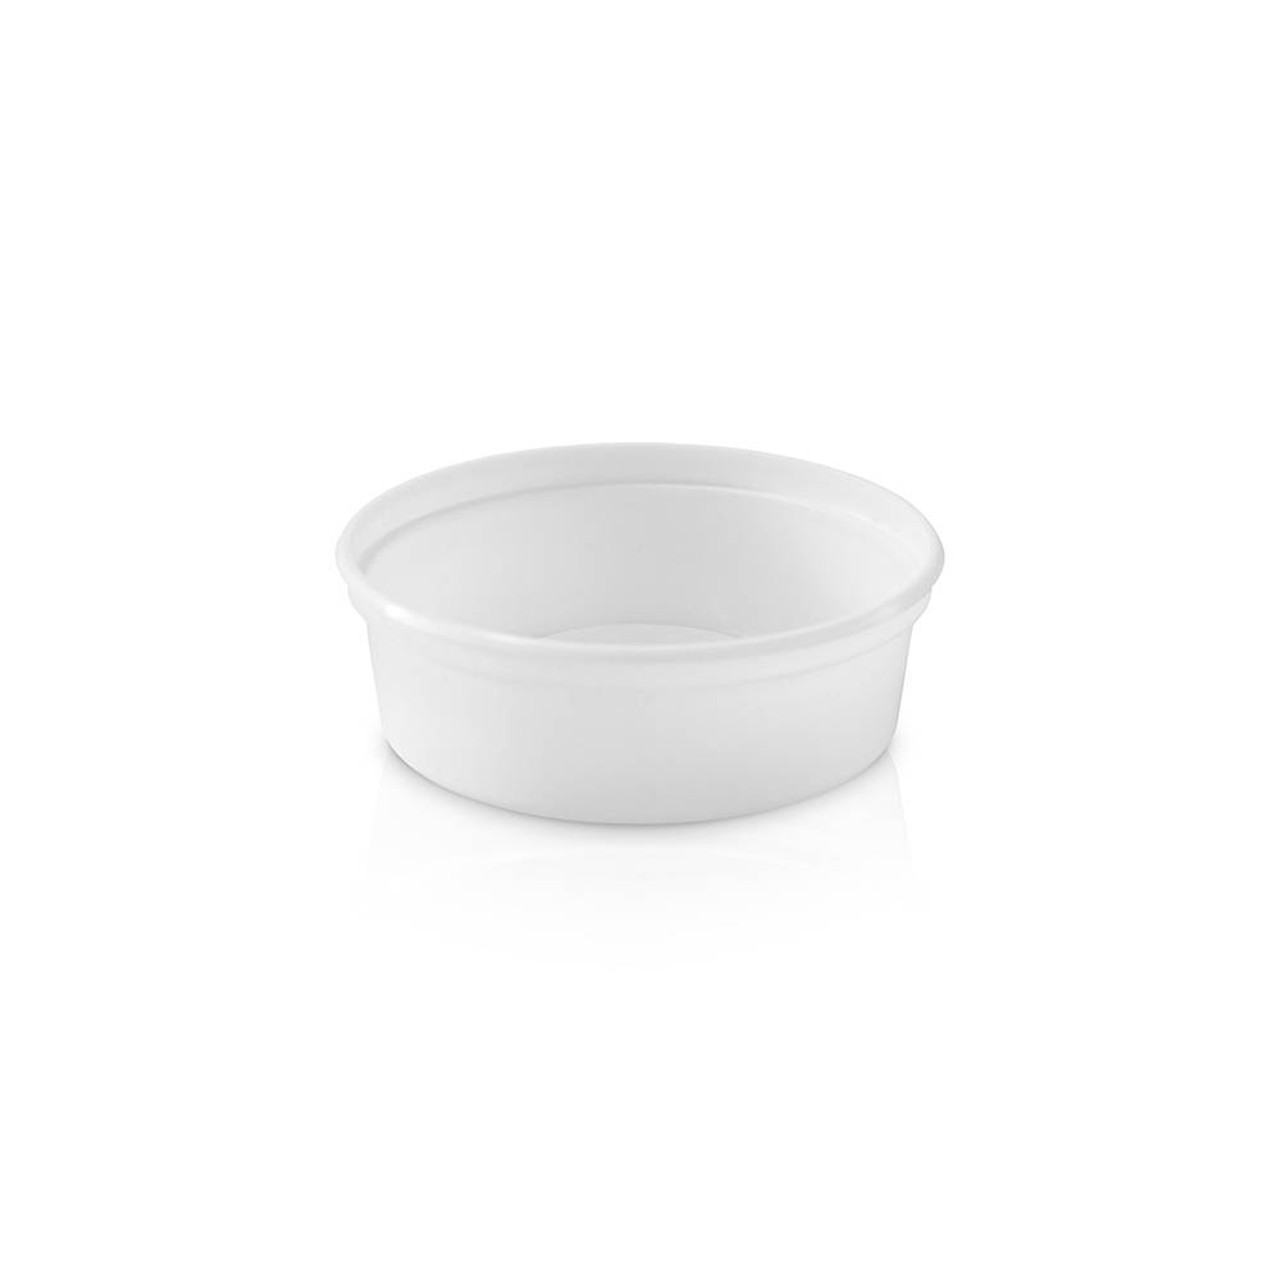 4 oz. BPA Free Food Grade Round Pry-Off Containers (T20604PR) - 1000 count  - case - White